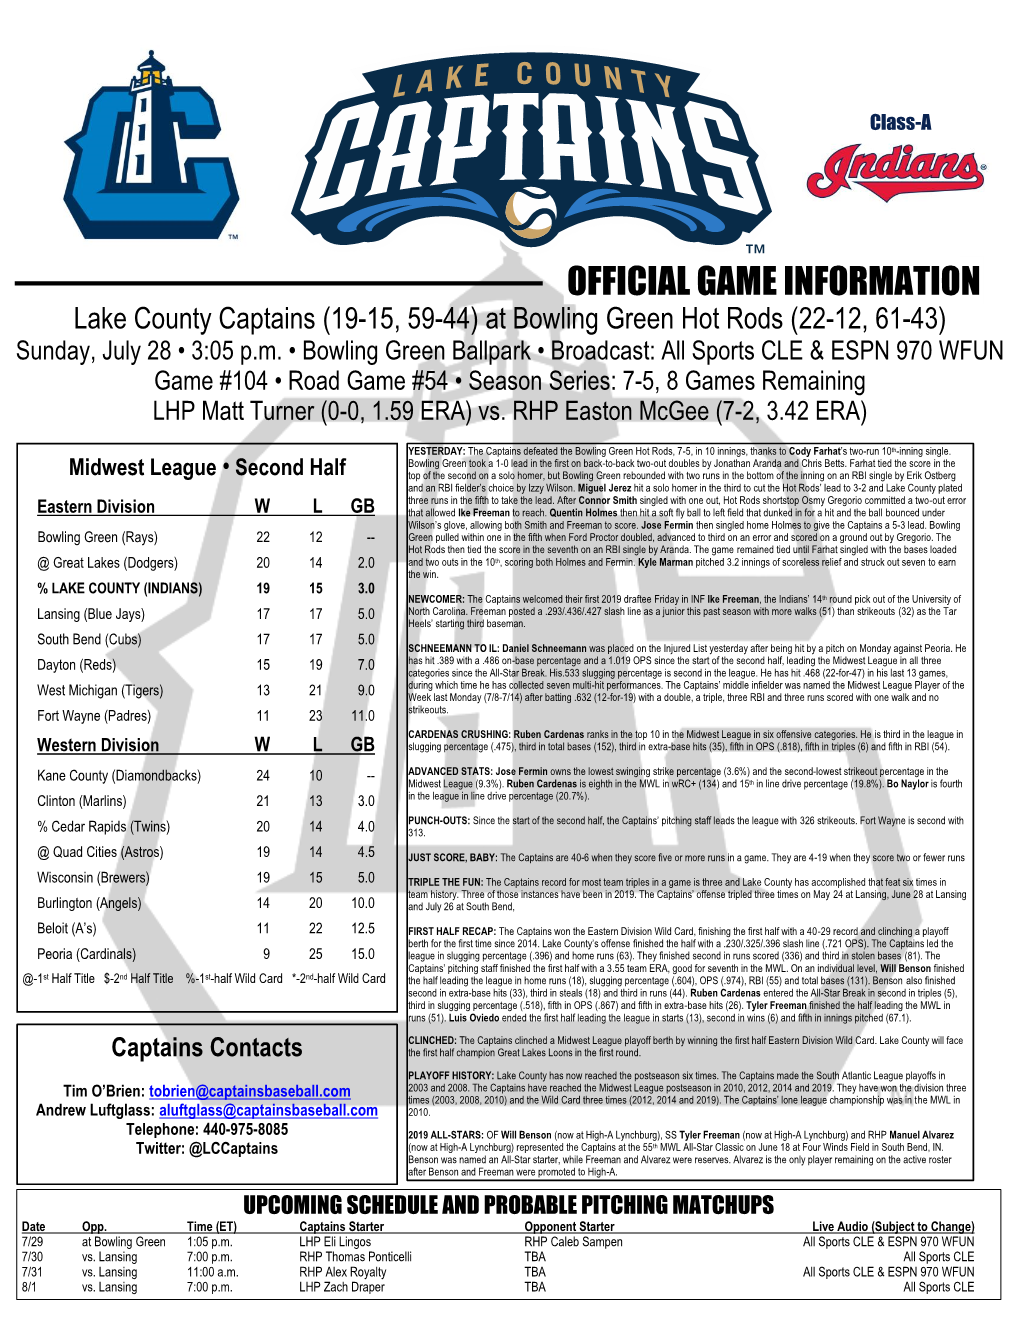 OFFICIAL GAME INFORMATION Lake County Captains (19-15, 59-44) at Bowling Green Hot Rods (22-12, 61-43) Sunday, July 28 • 3:05 P.M